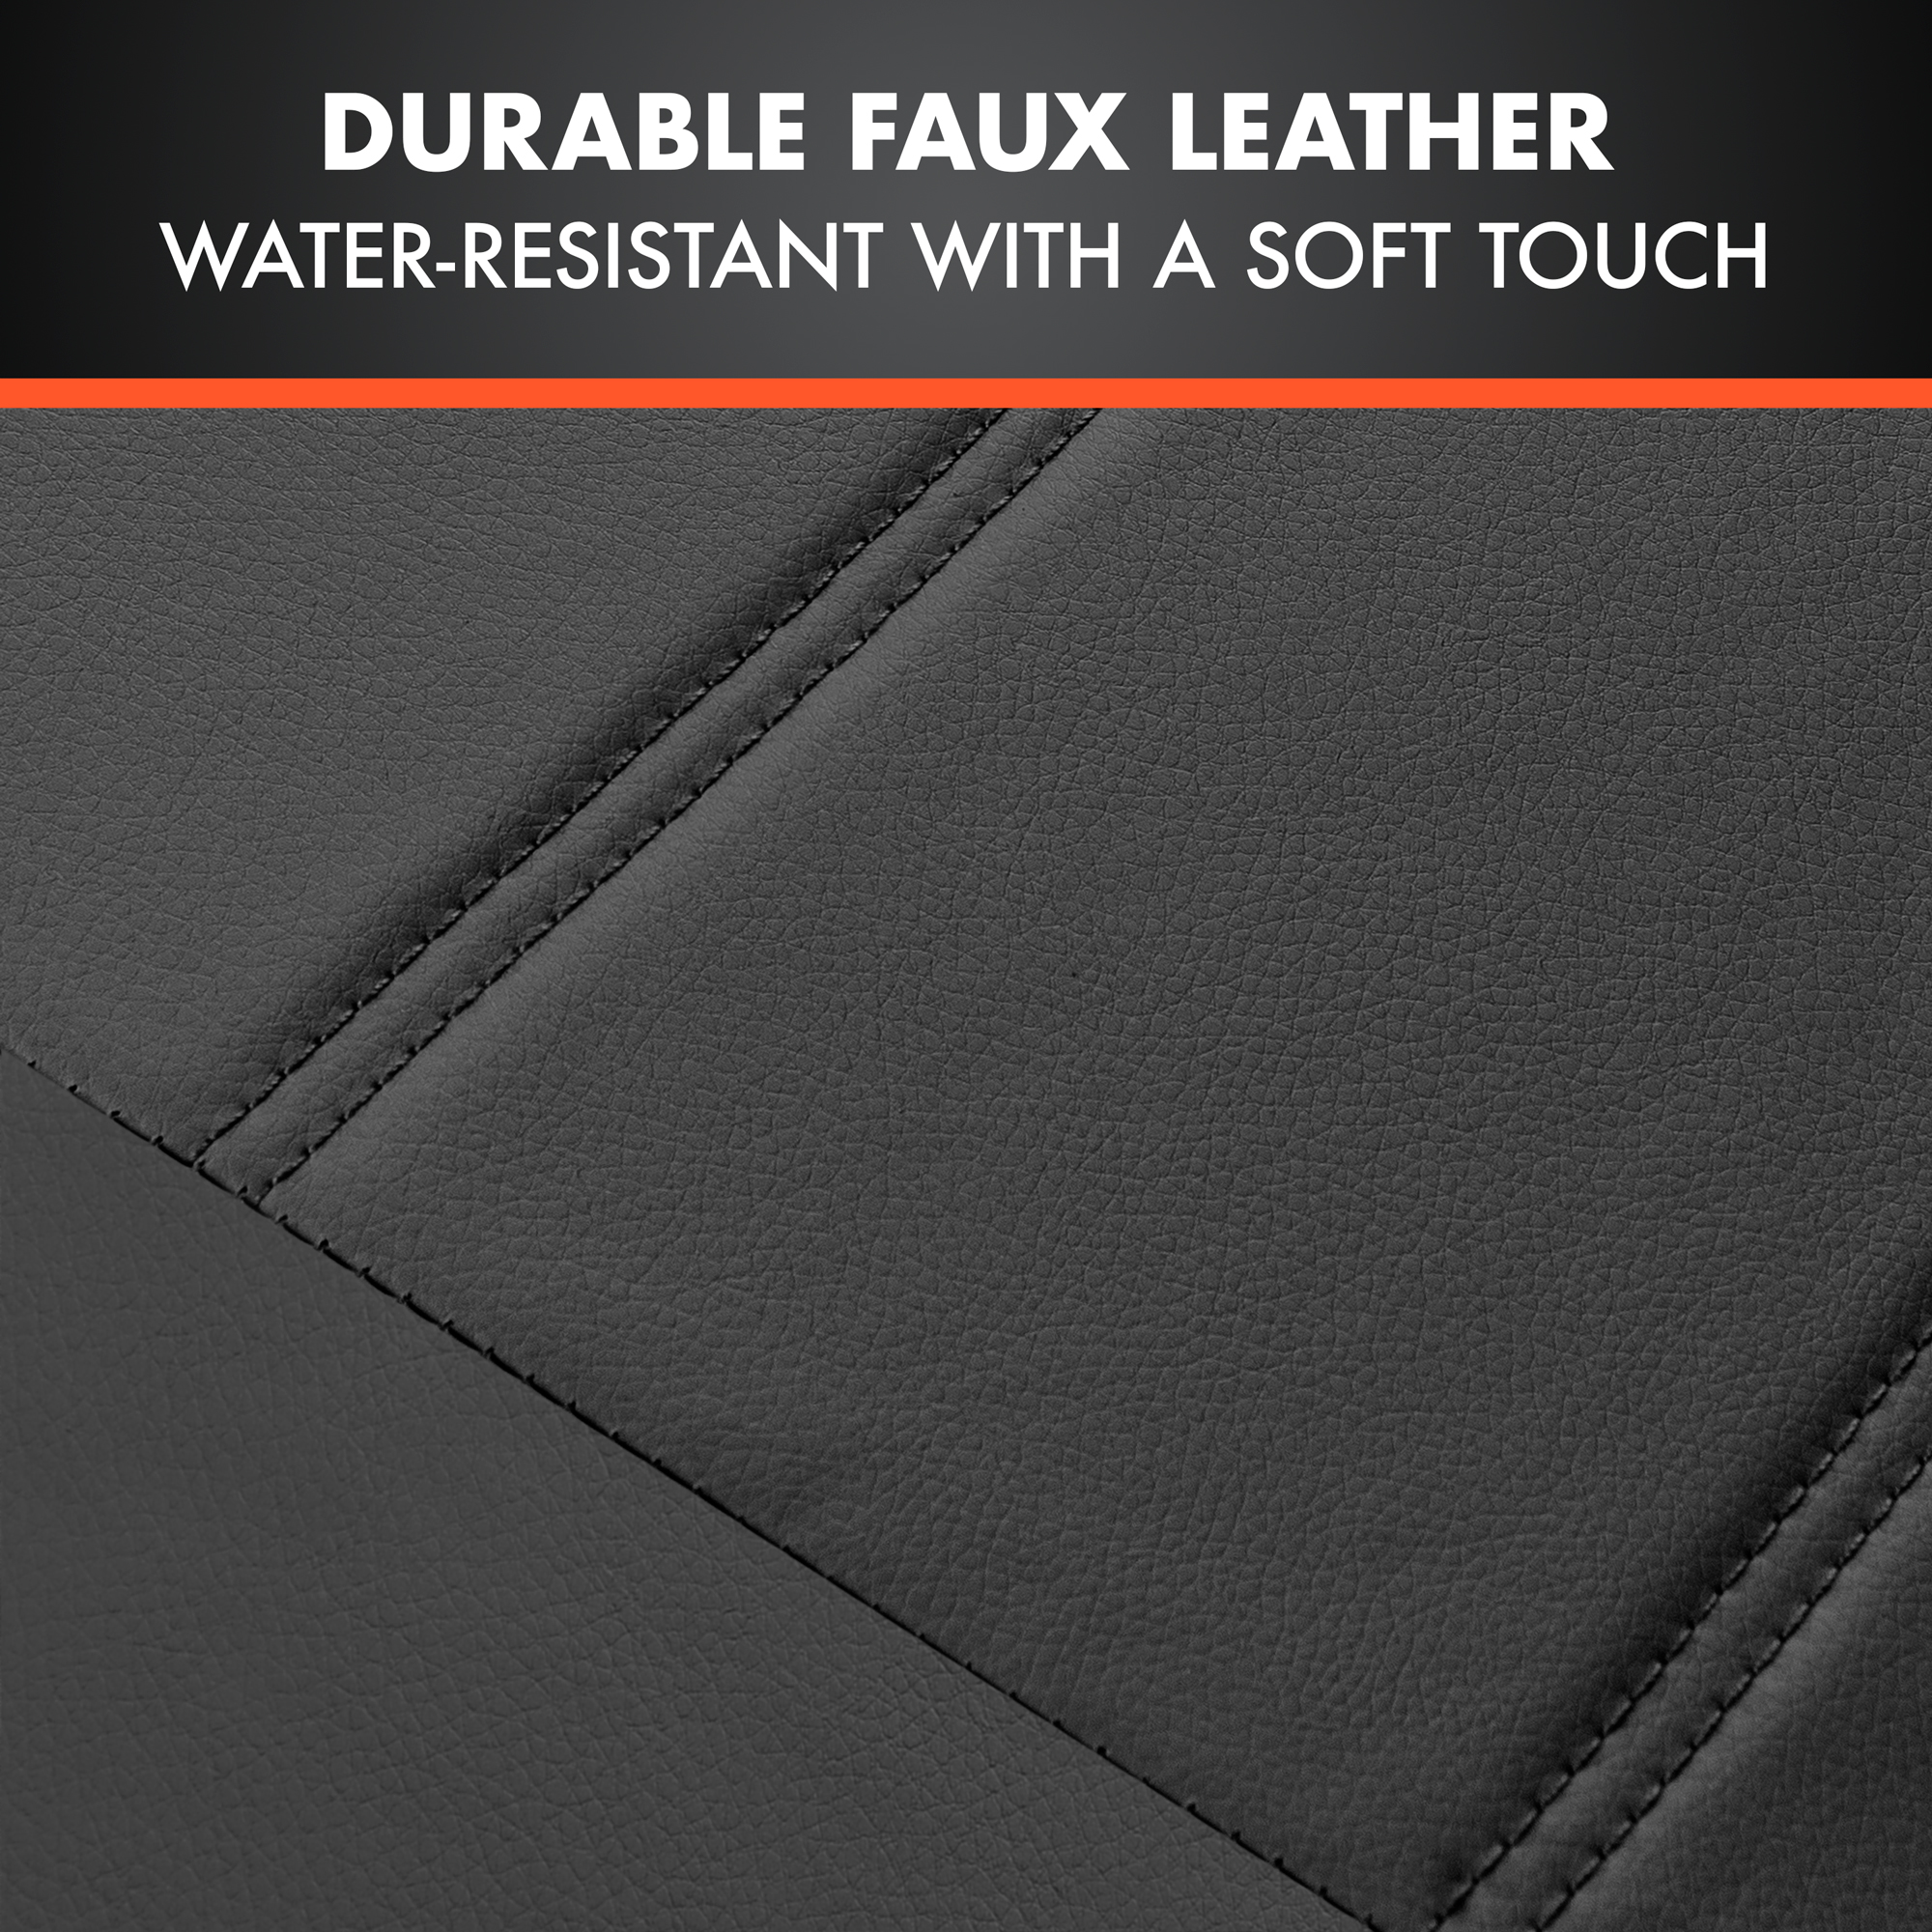 carXS UltraLuxe Black Faux Leather Car Seat Covers Full Set, Front & Rear Bench Seat Cover for Cars Trucks SUV - image 6 of 8